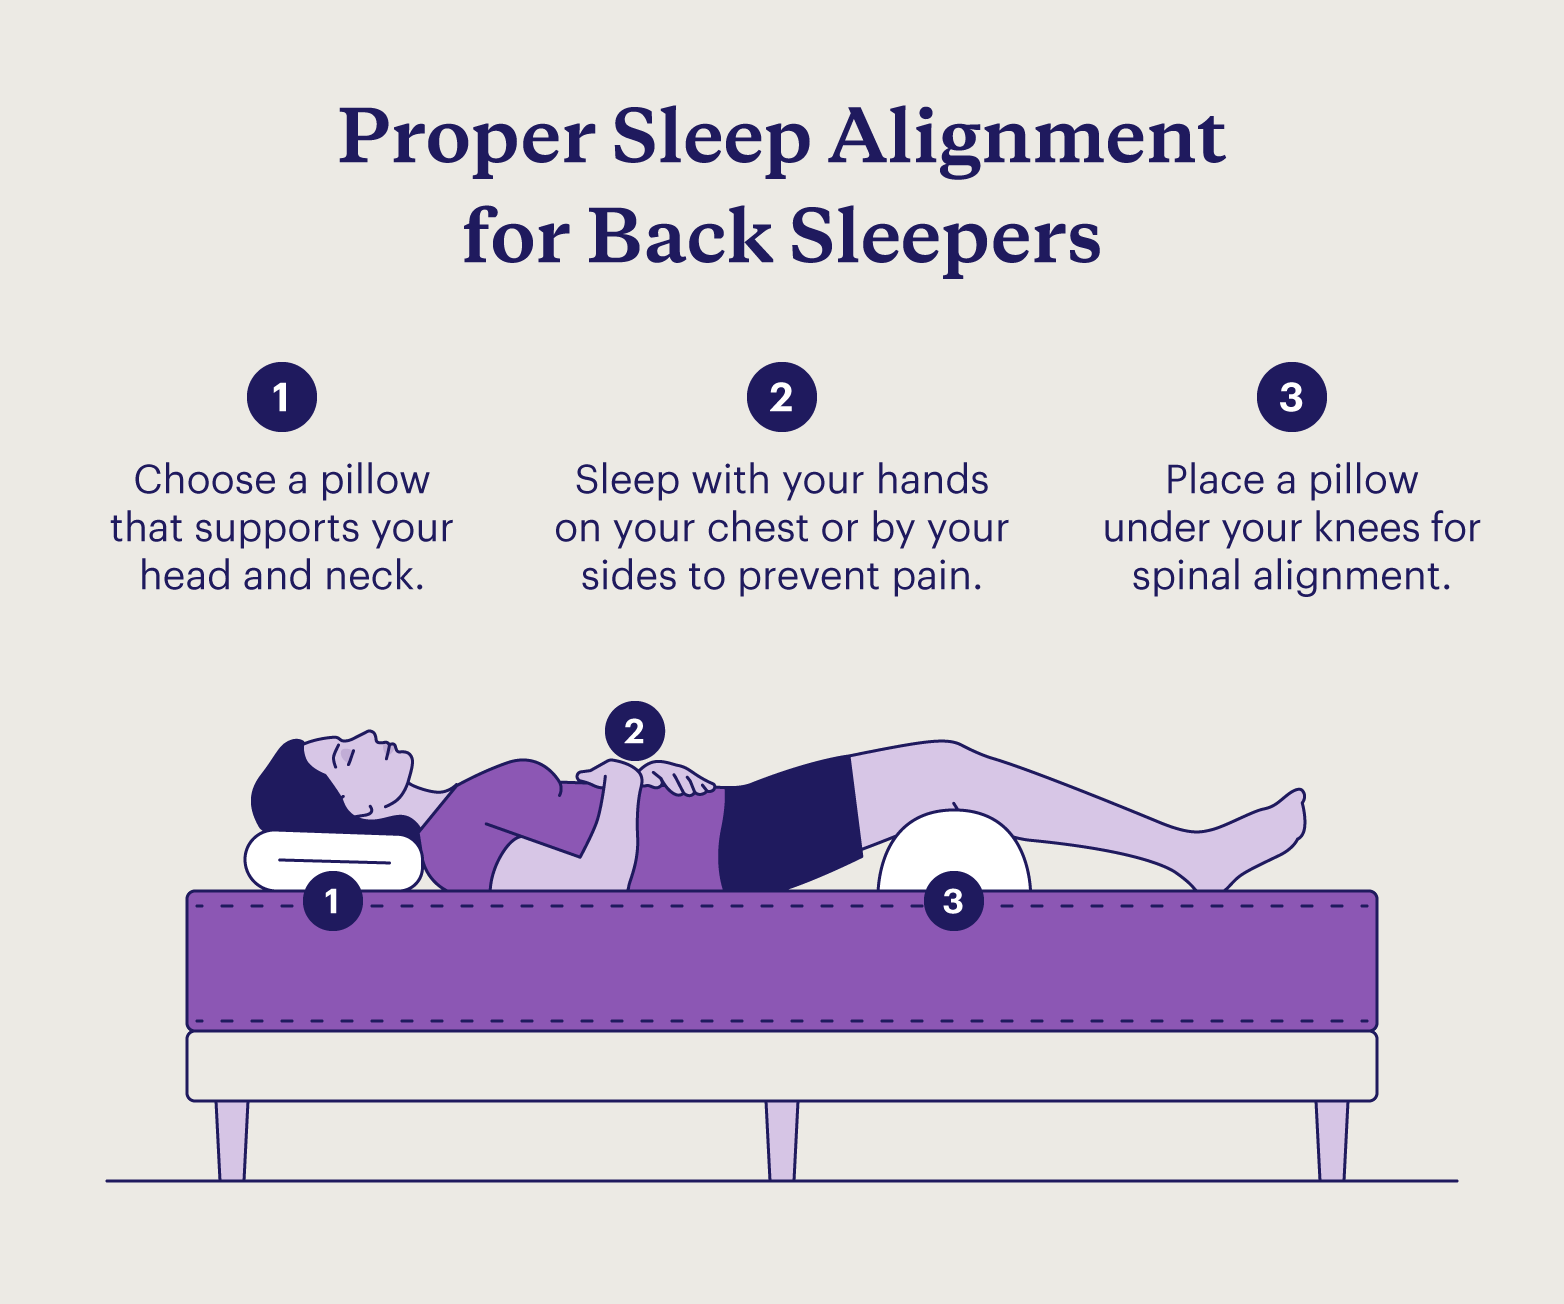 Ilustration depicting proper sleep alignment tips for back sleepers.